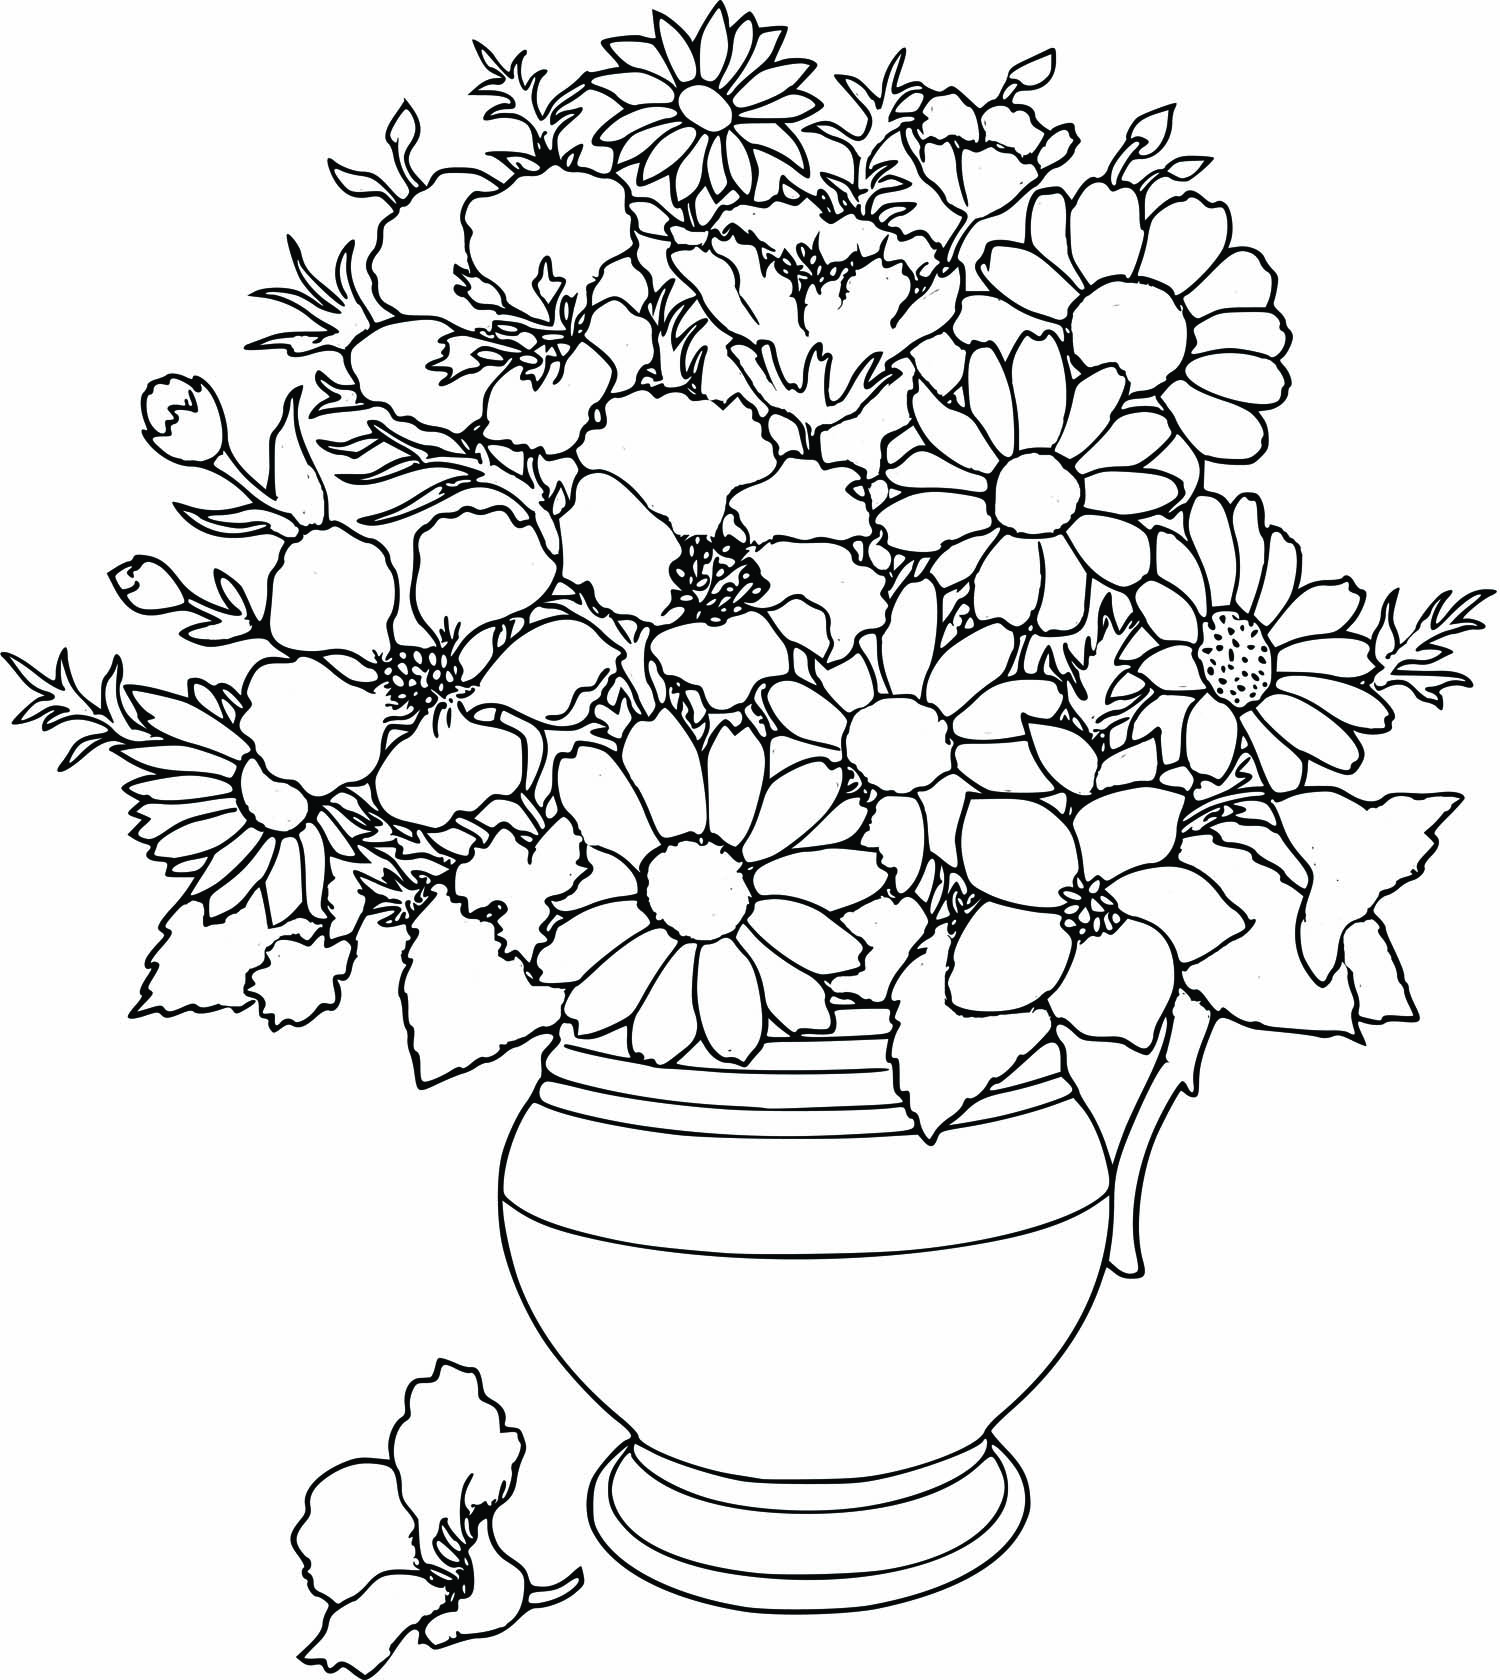 Coloring Sheets Of Flowers 9